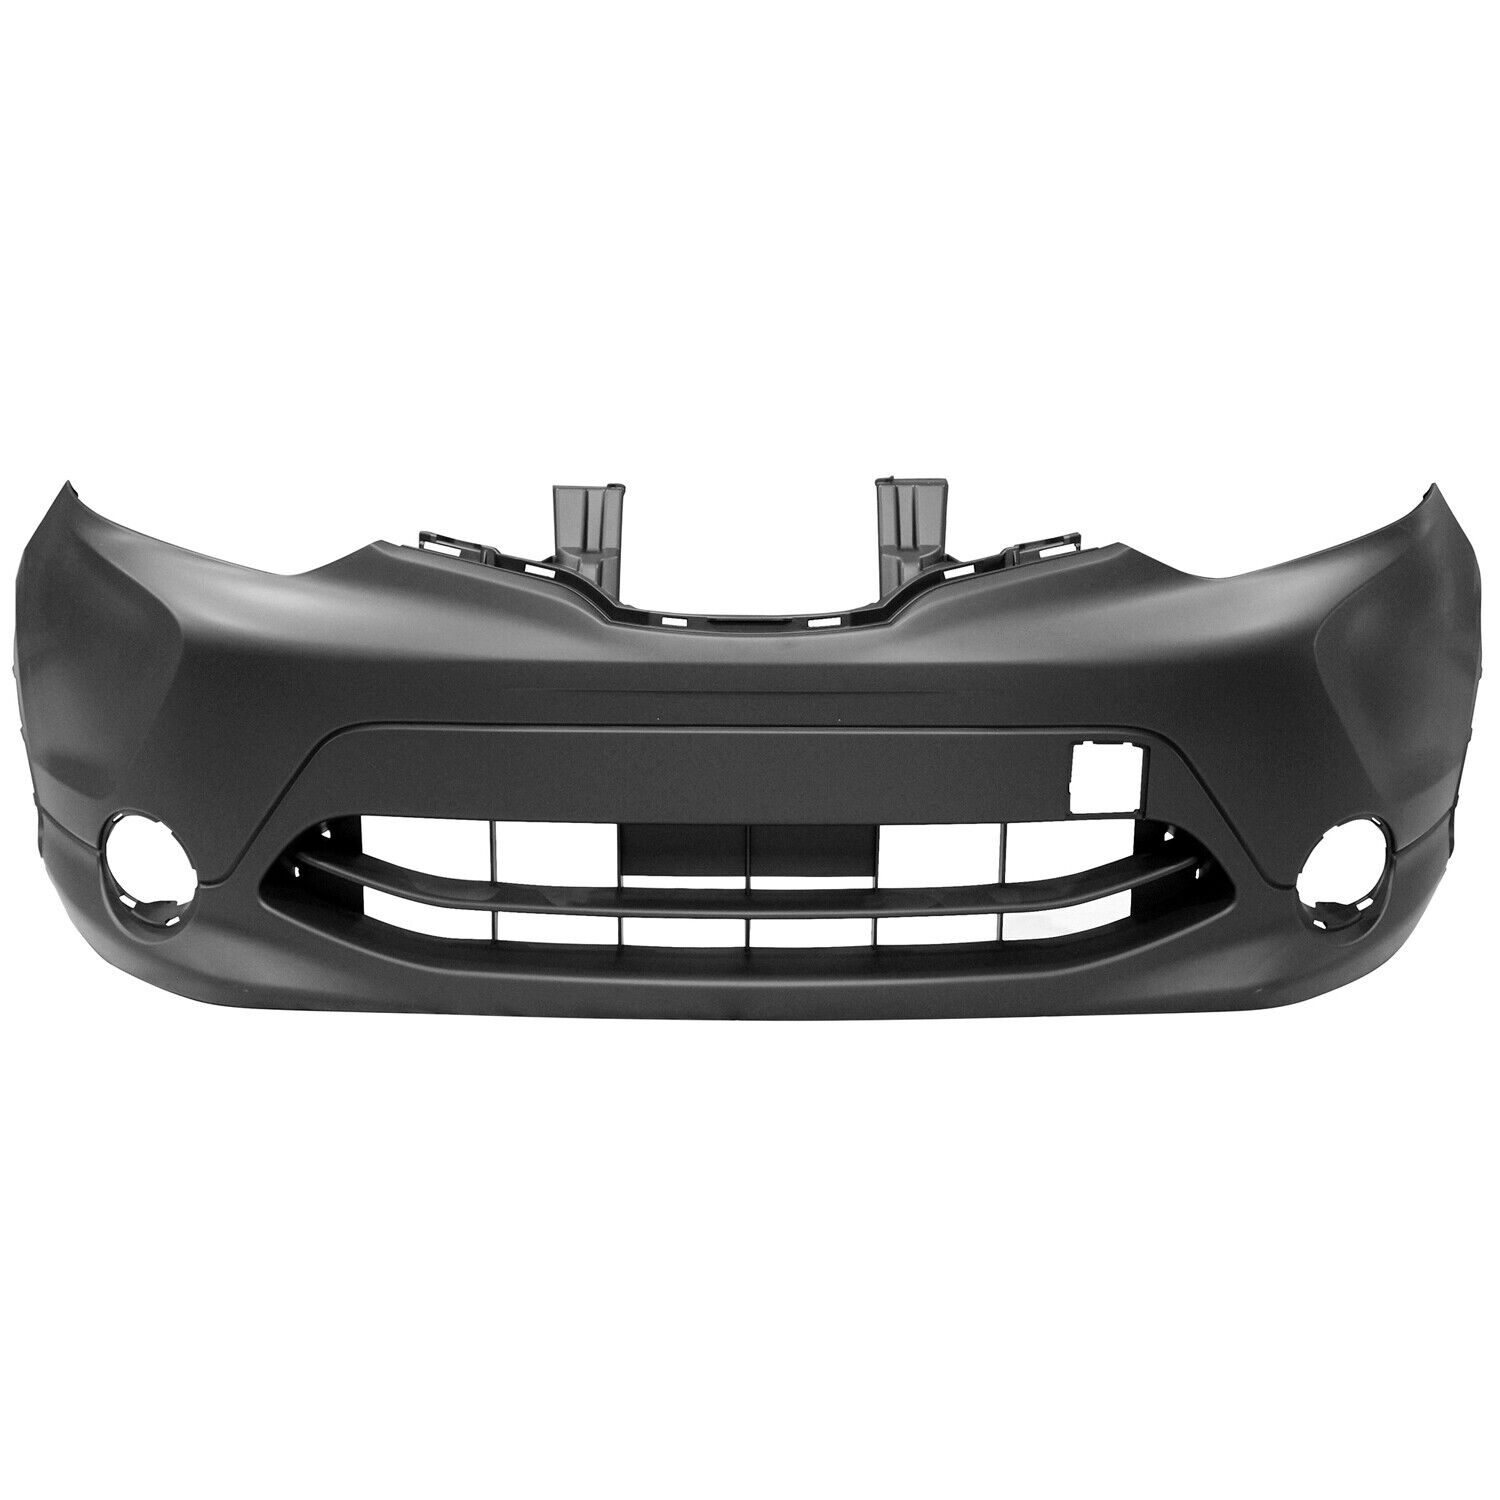 Front bumper cover for 2017-2019 NISSAN QASHQAI fits NI1000318 / 620226MA0H